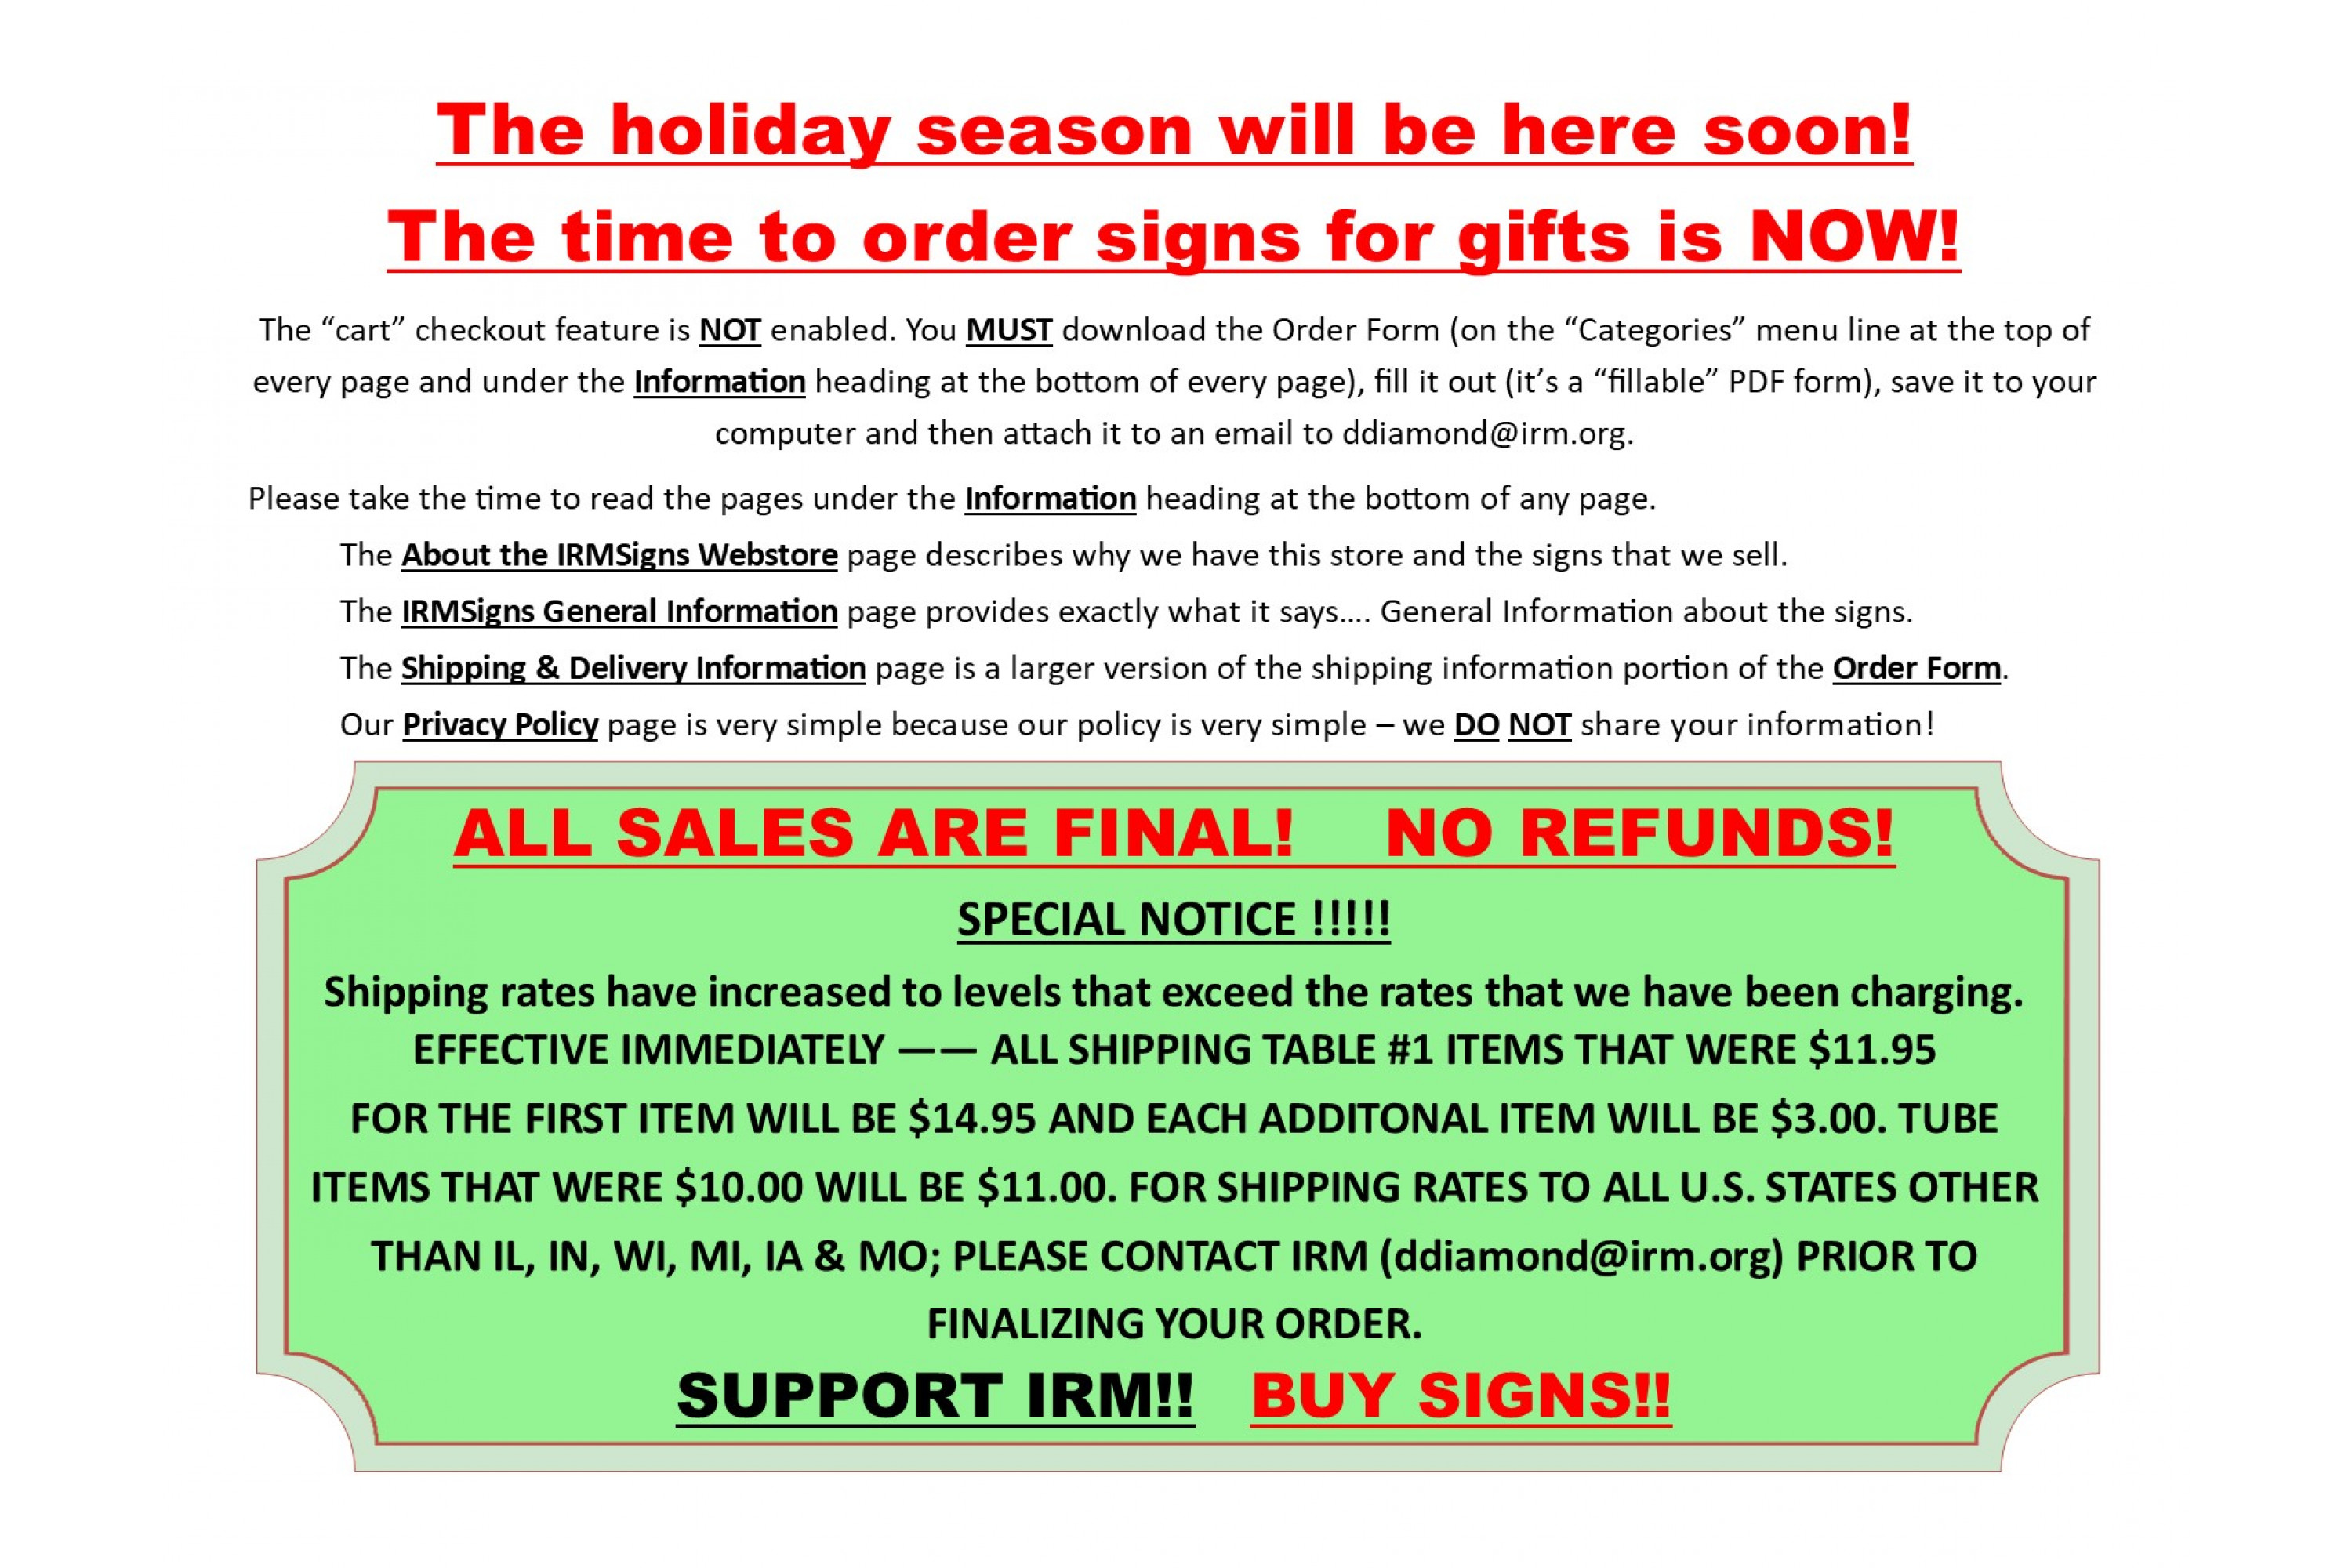 20211101 NO Refunds + Holiday season - Shipping rate changes